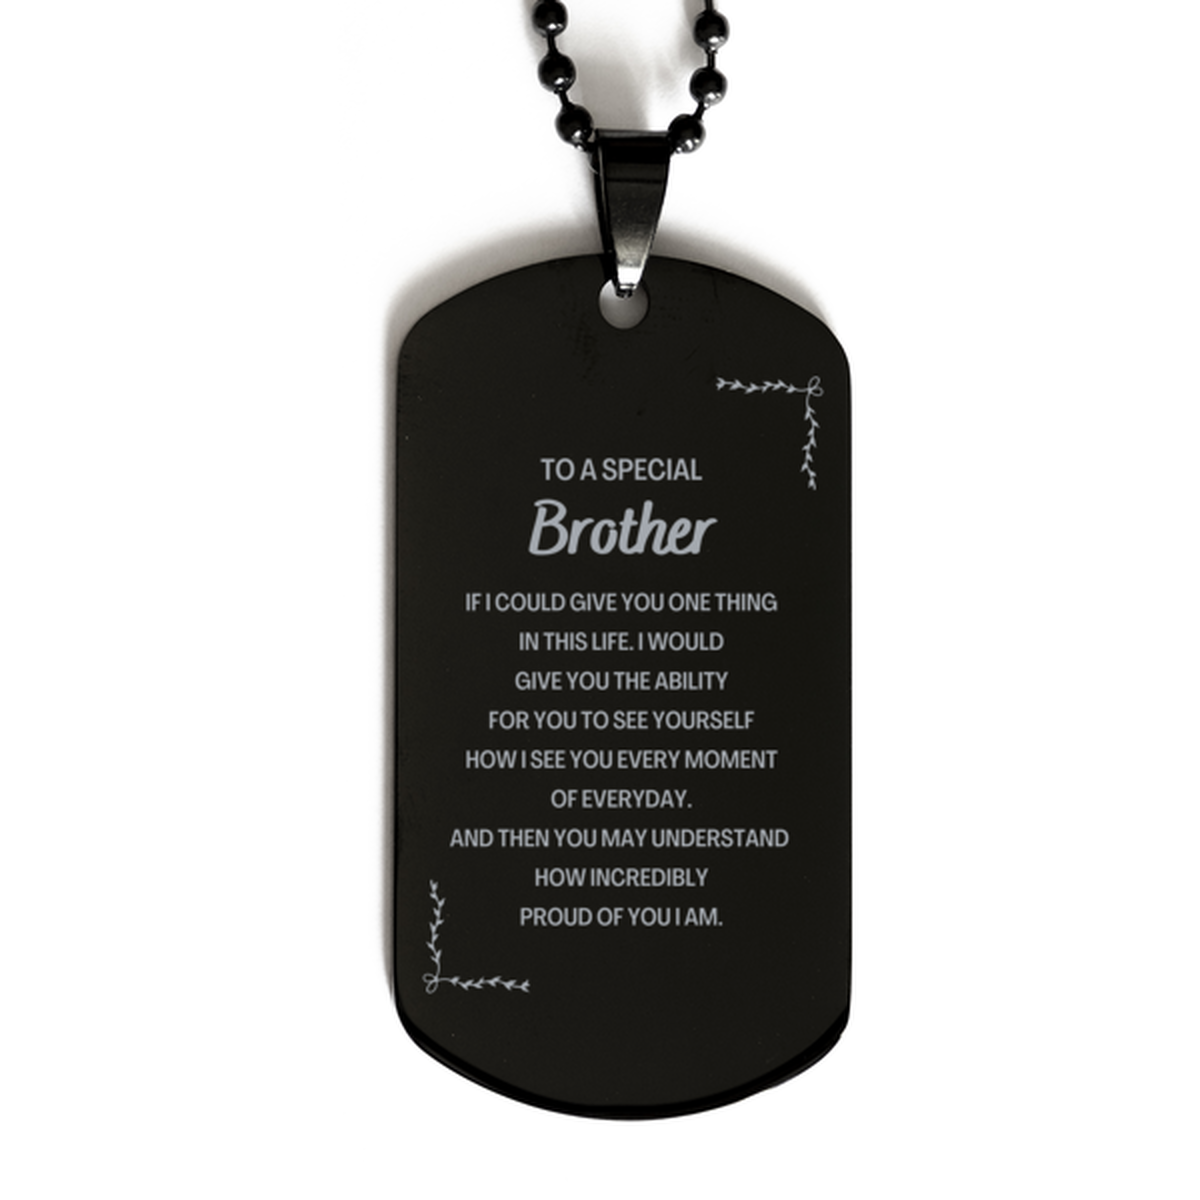 To My Brother Black Dog Tag, Gifts For Brother Engraved, Inspirational Gifts for Christmas Birthday, Epic Gifts for Brother To A Special Brother how incredibly proud of you I am